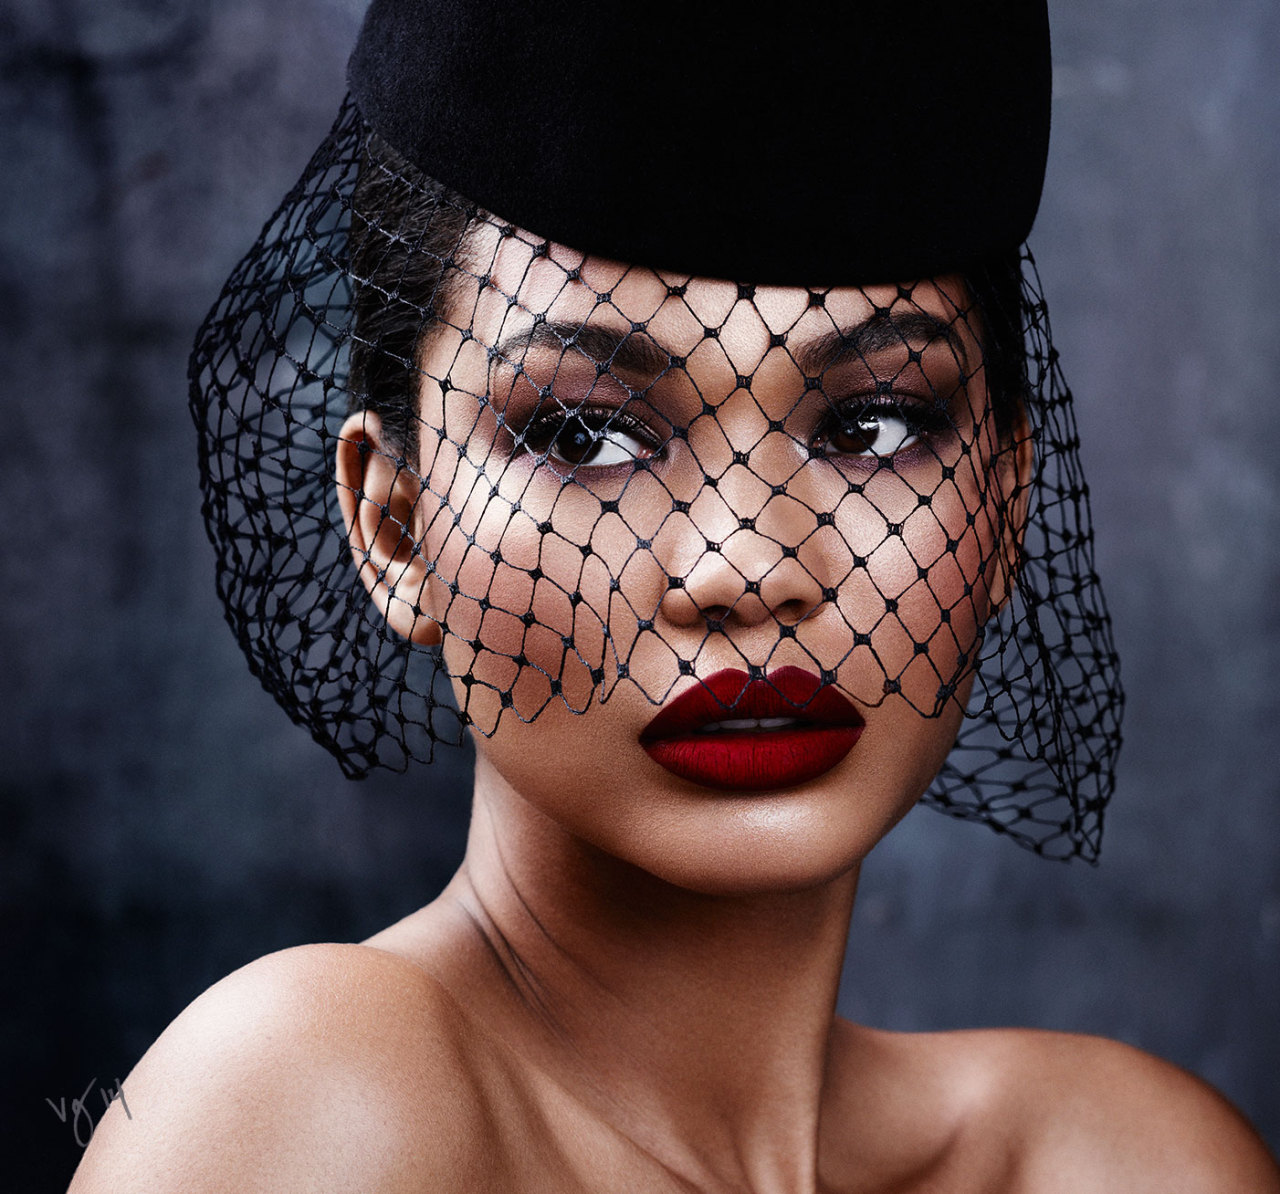 ddipddi:  Chanel Iman photographed by Ben Hassett for Violet Grey’s The Violet